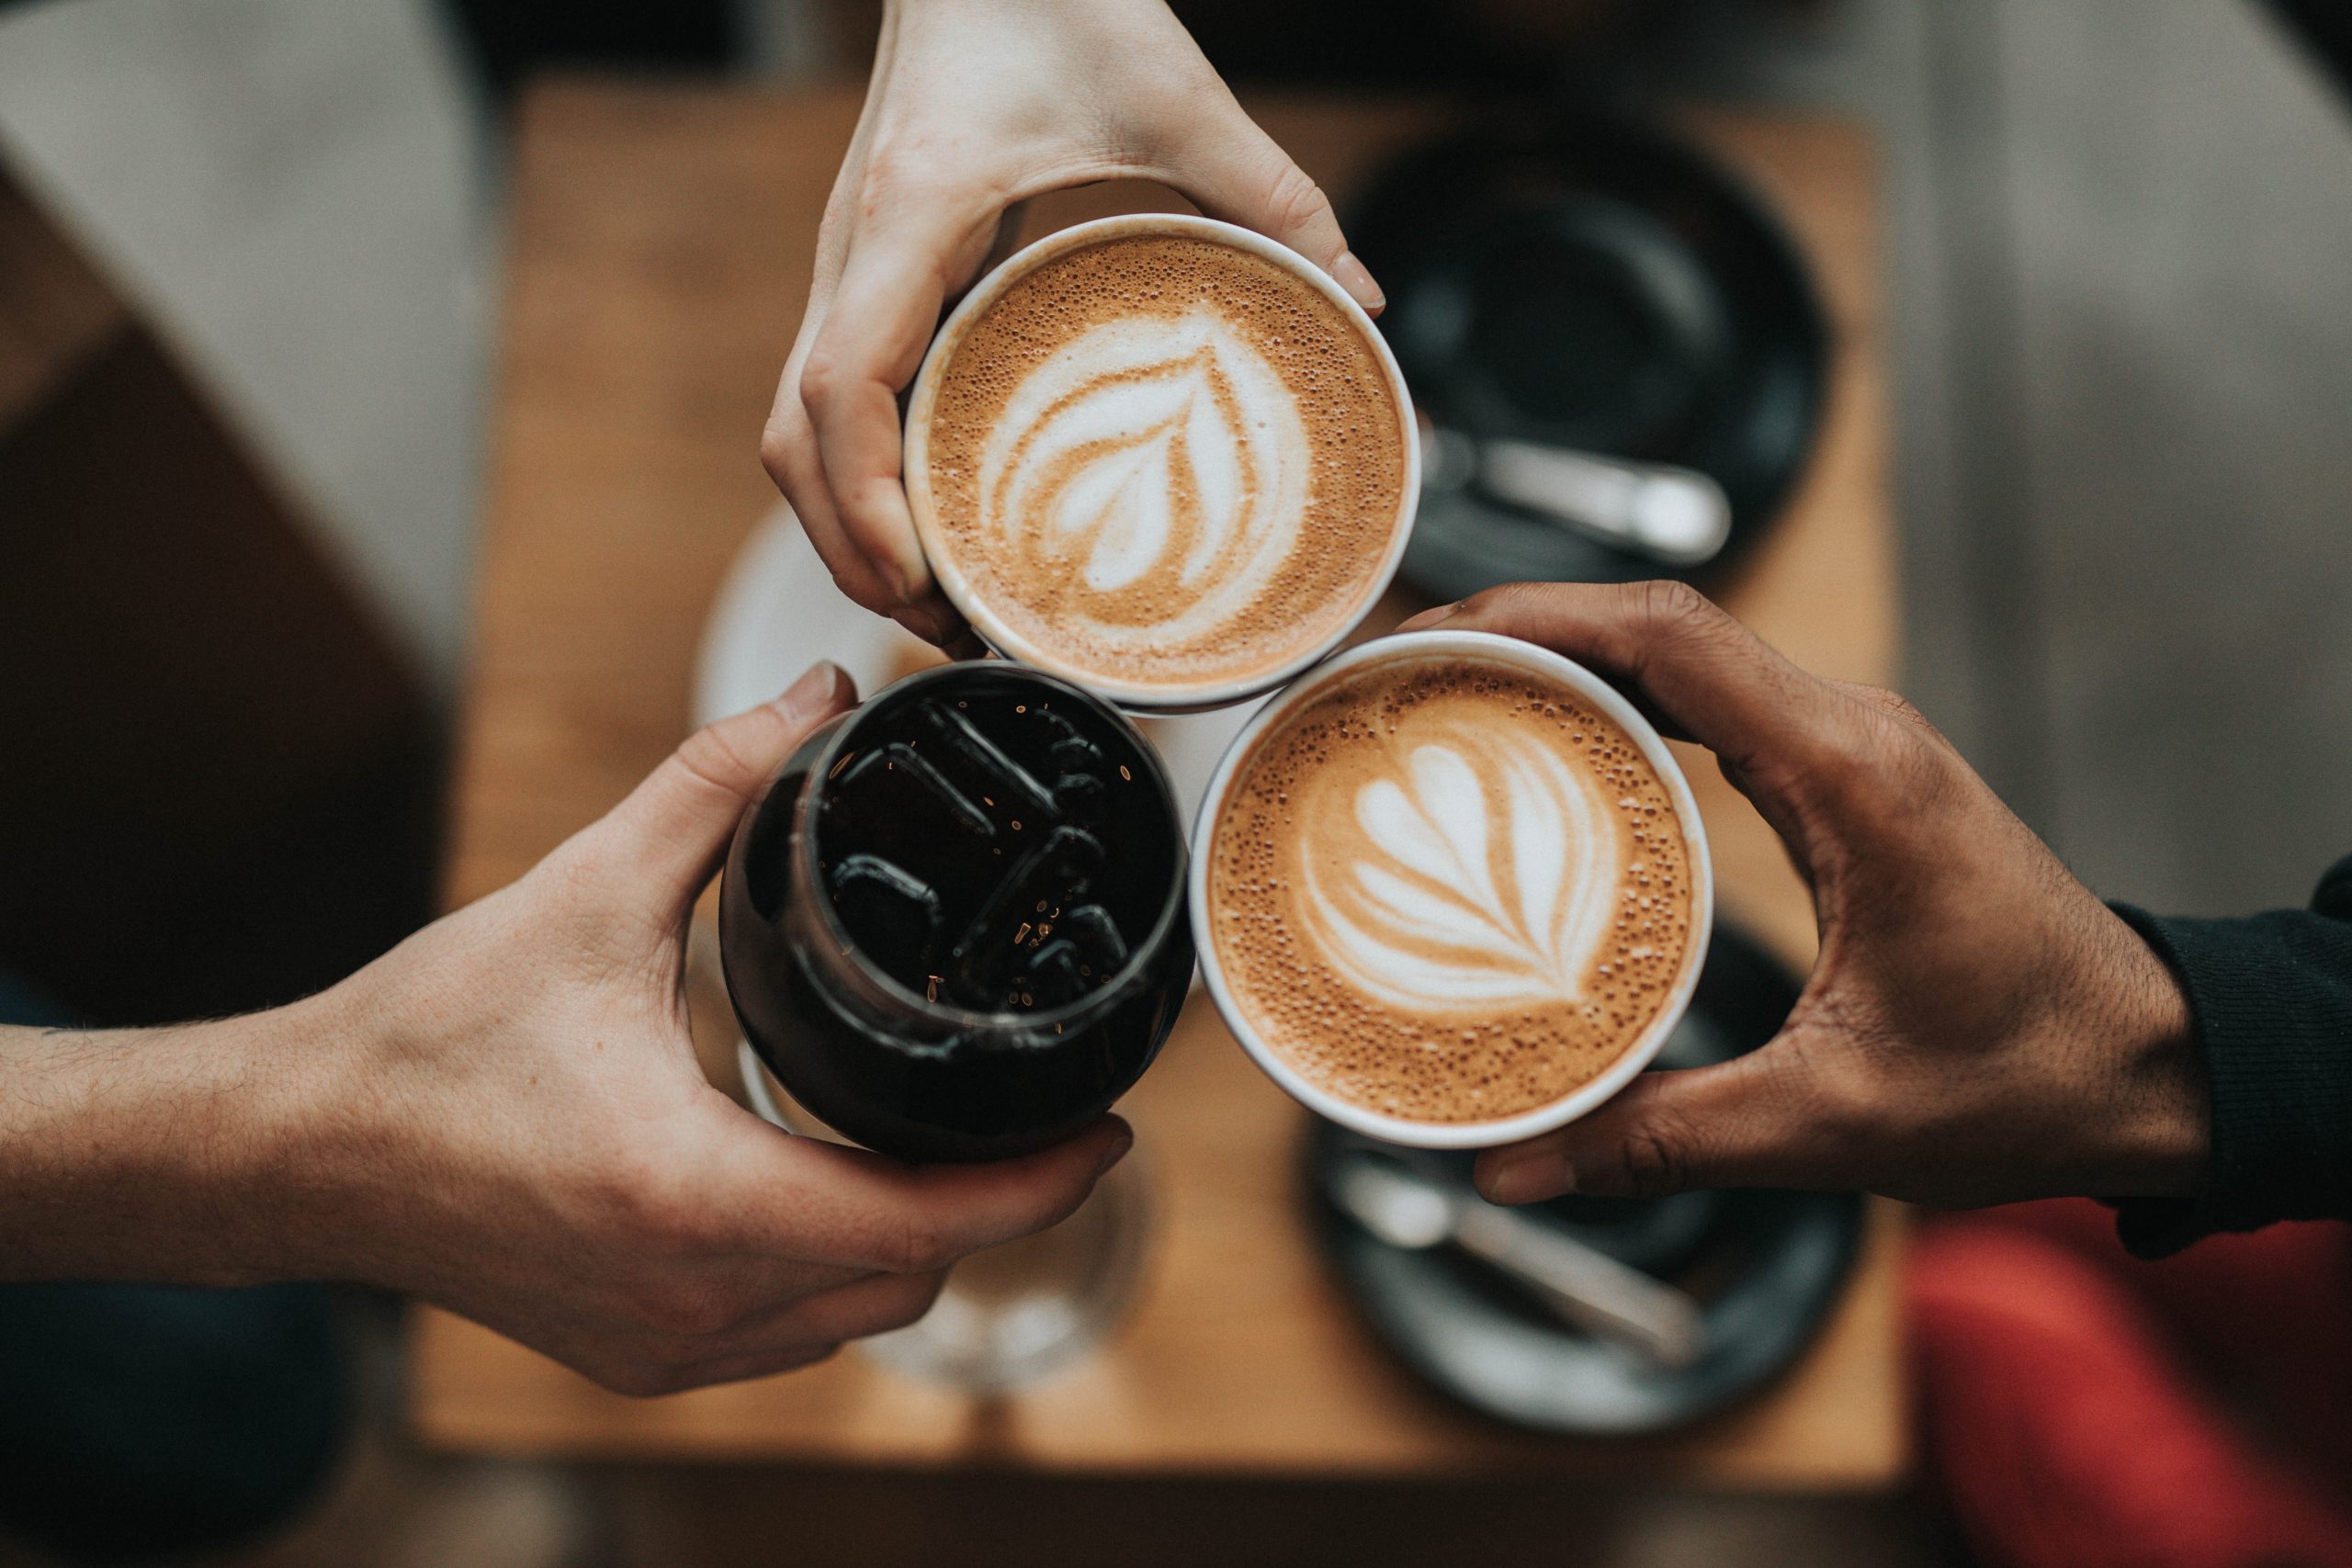 Three outstretched hands holding coffee cups